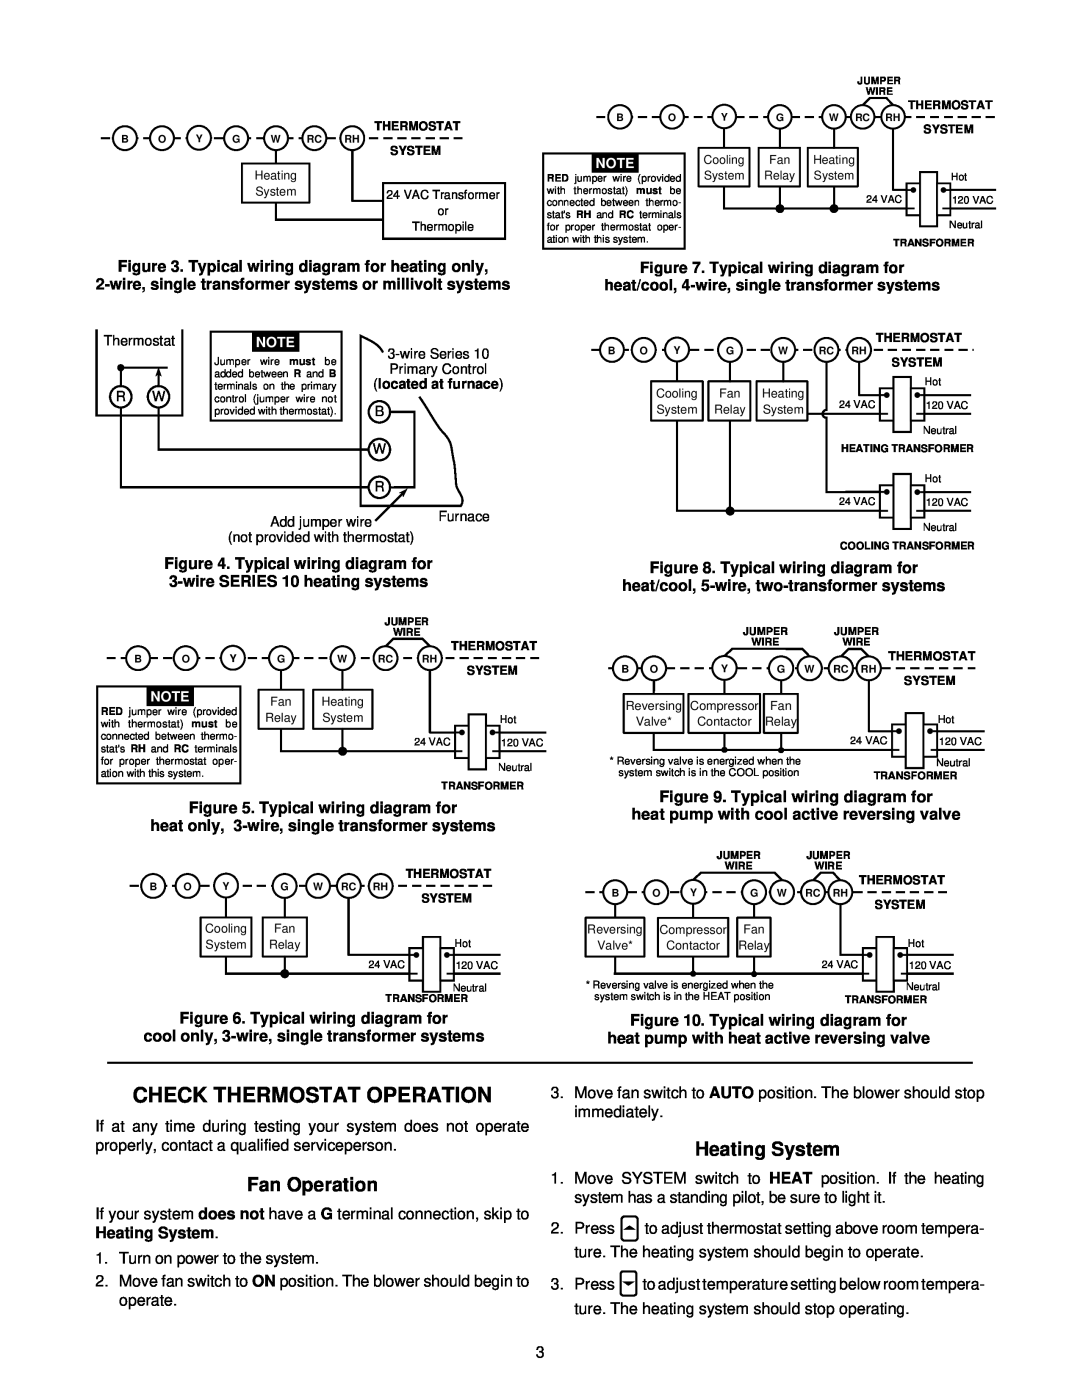 White Rodgers 1F80-51 Check Thermostat Operation, Fan Operation, Heating System, Typical wiring diagram for heating only 